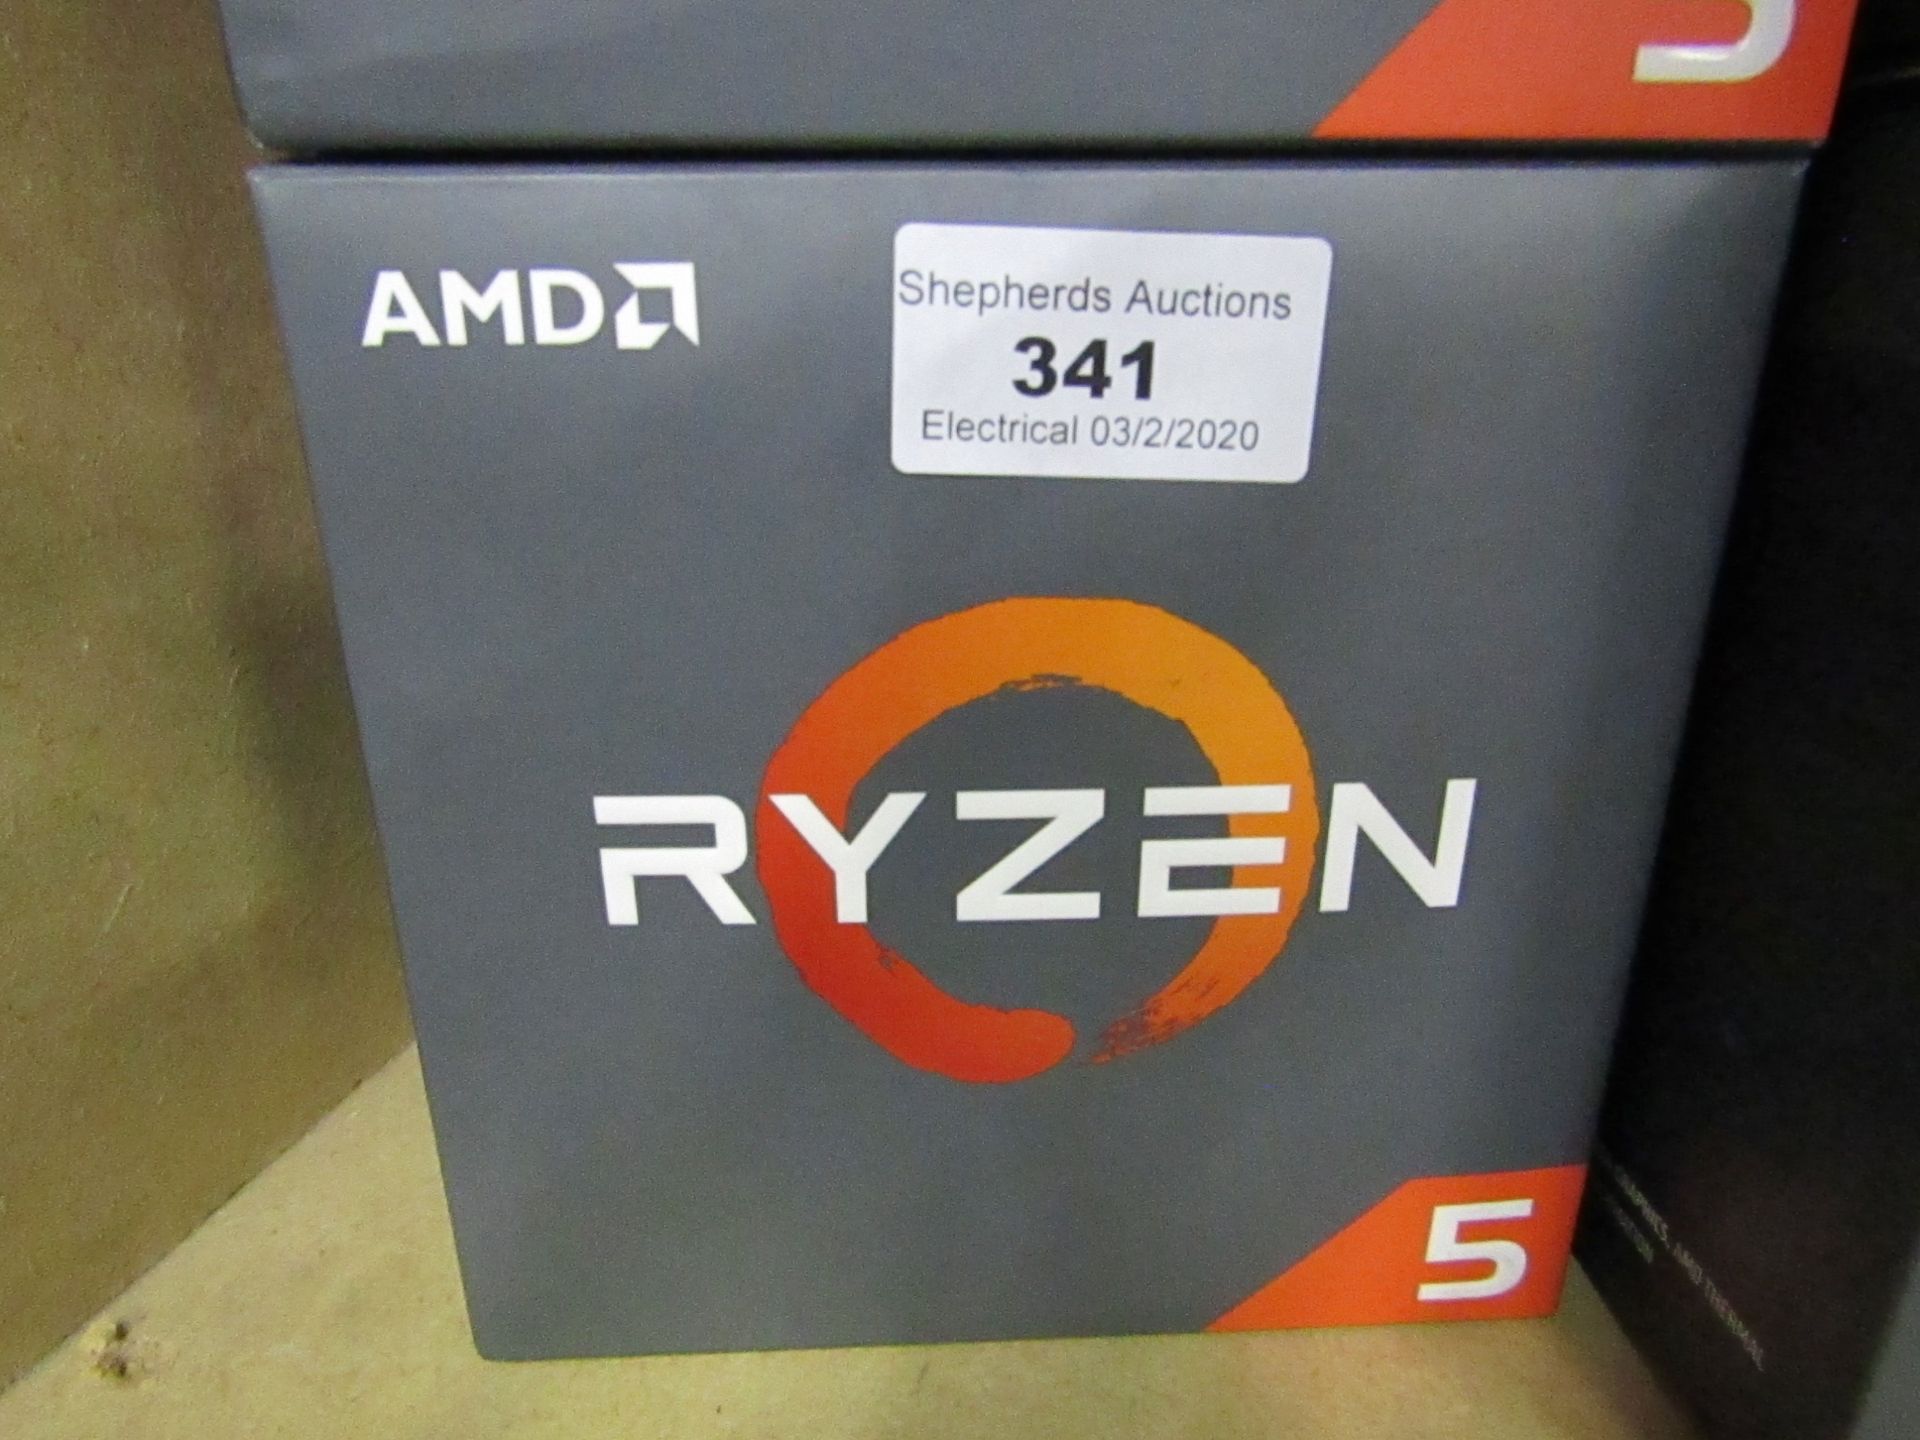 RYZEN - AMD 5 - Untested and boxed.